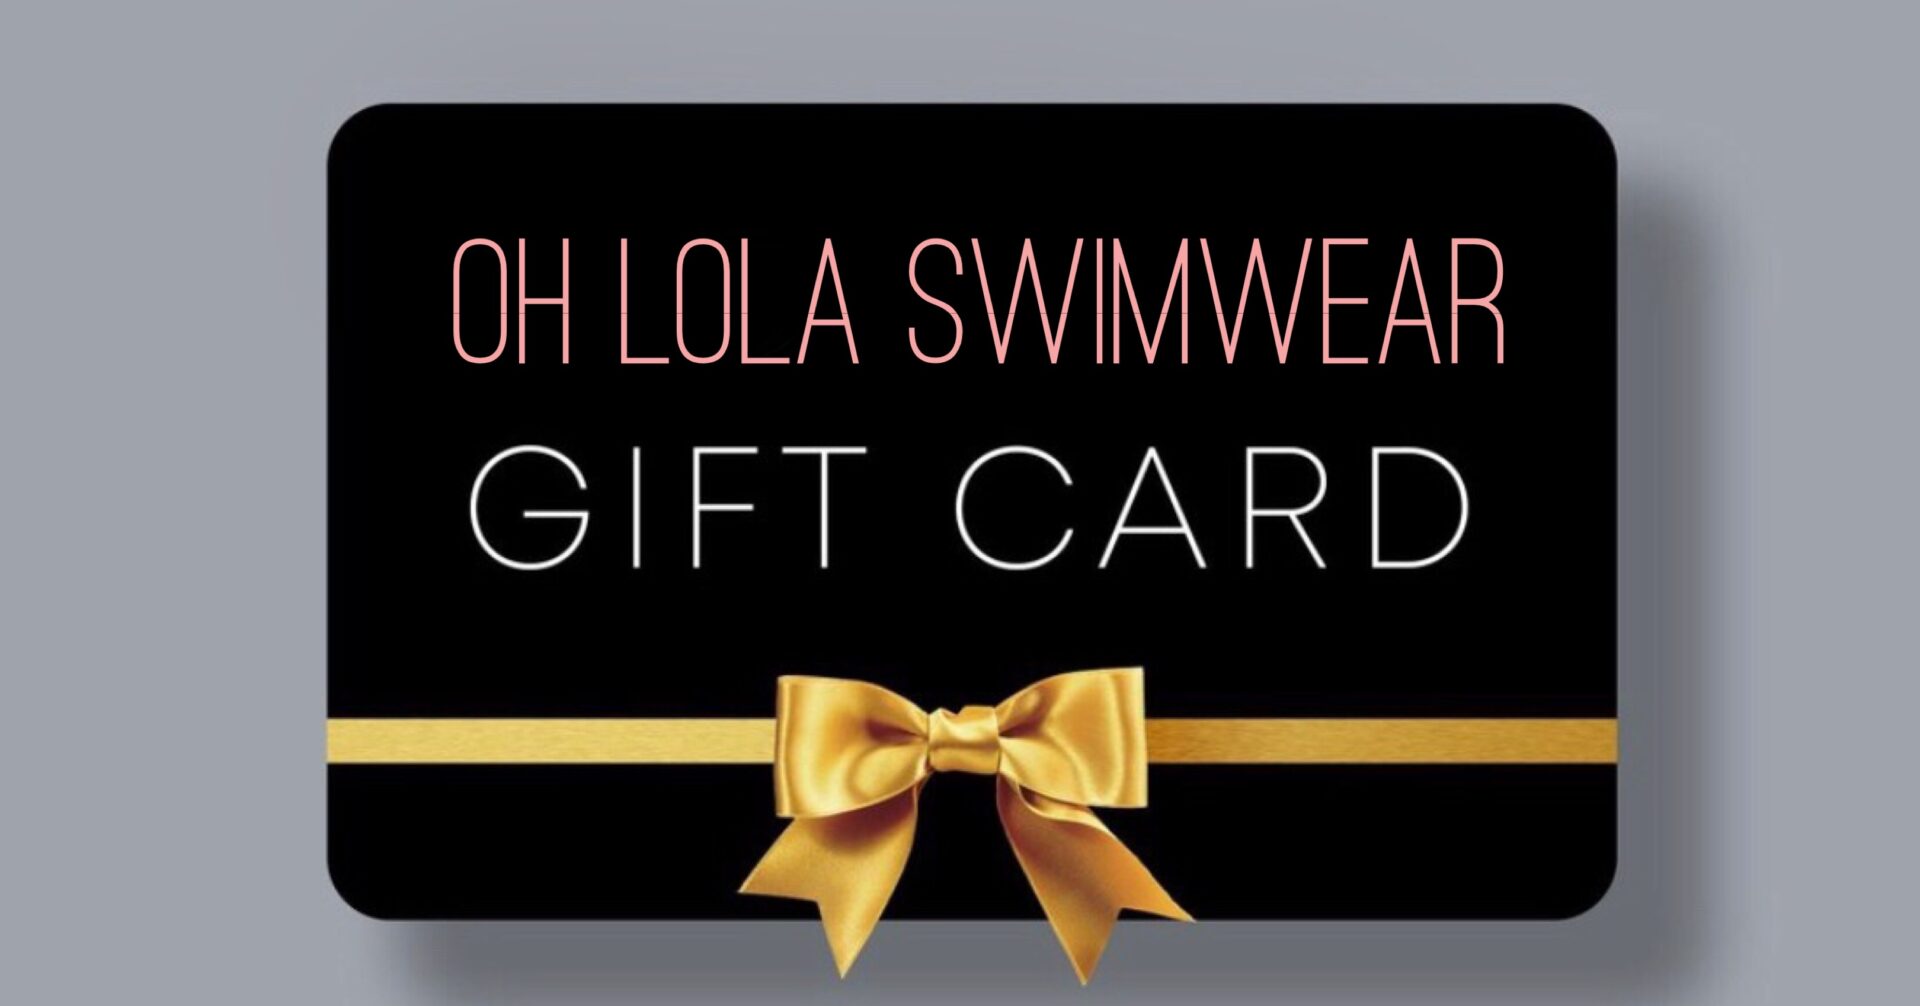 Gift Cards of 150 and above will get the free bikini